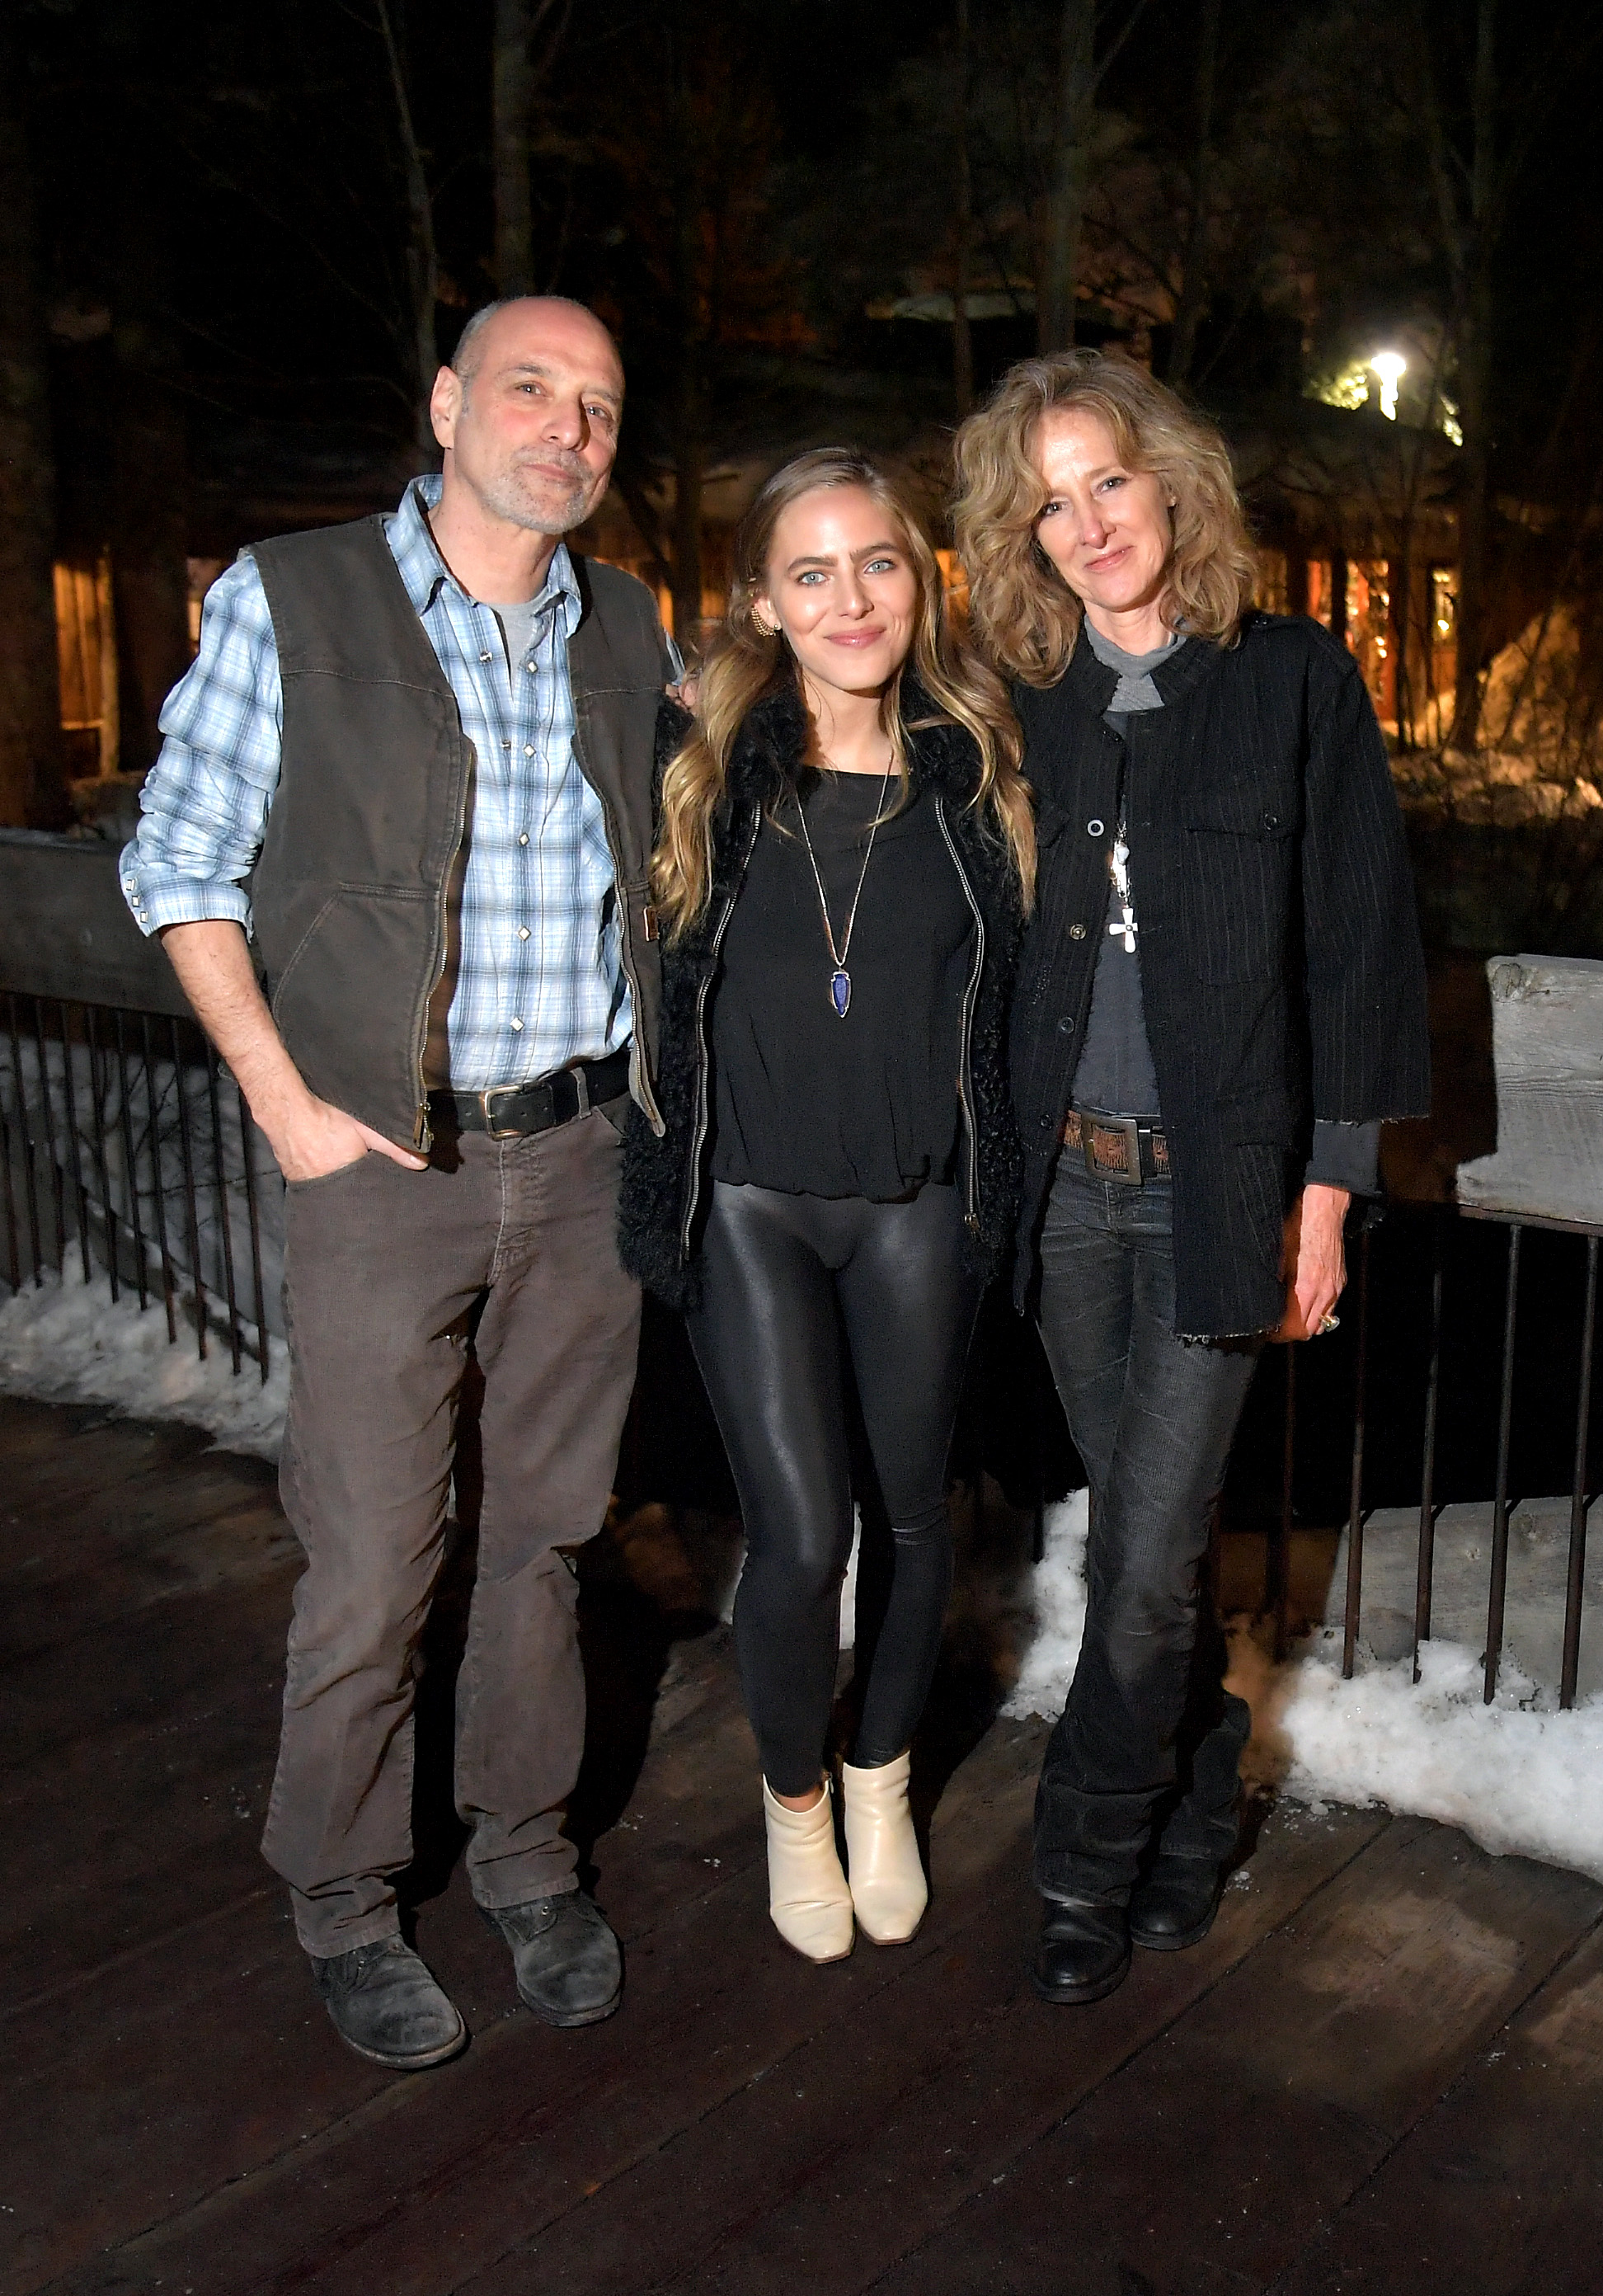 Eric Schlosser, Lauren Jenkins, and Shauna Redford attend the "Running Out of Road" music short film premiere during Sundance Film Festival 2019 at The Owl Bar on January 31, 2019, in Provo, Utah. | Source: Getty Images